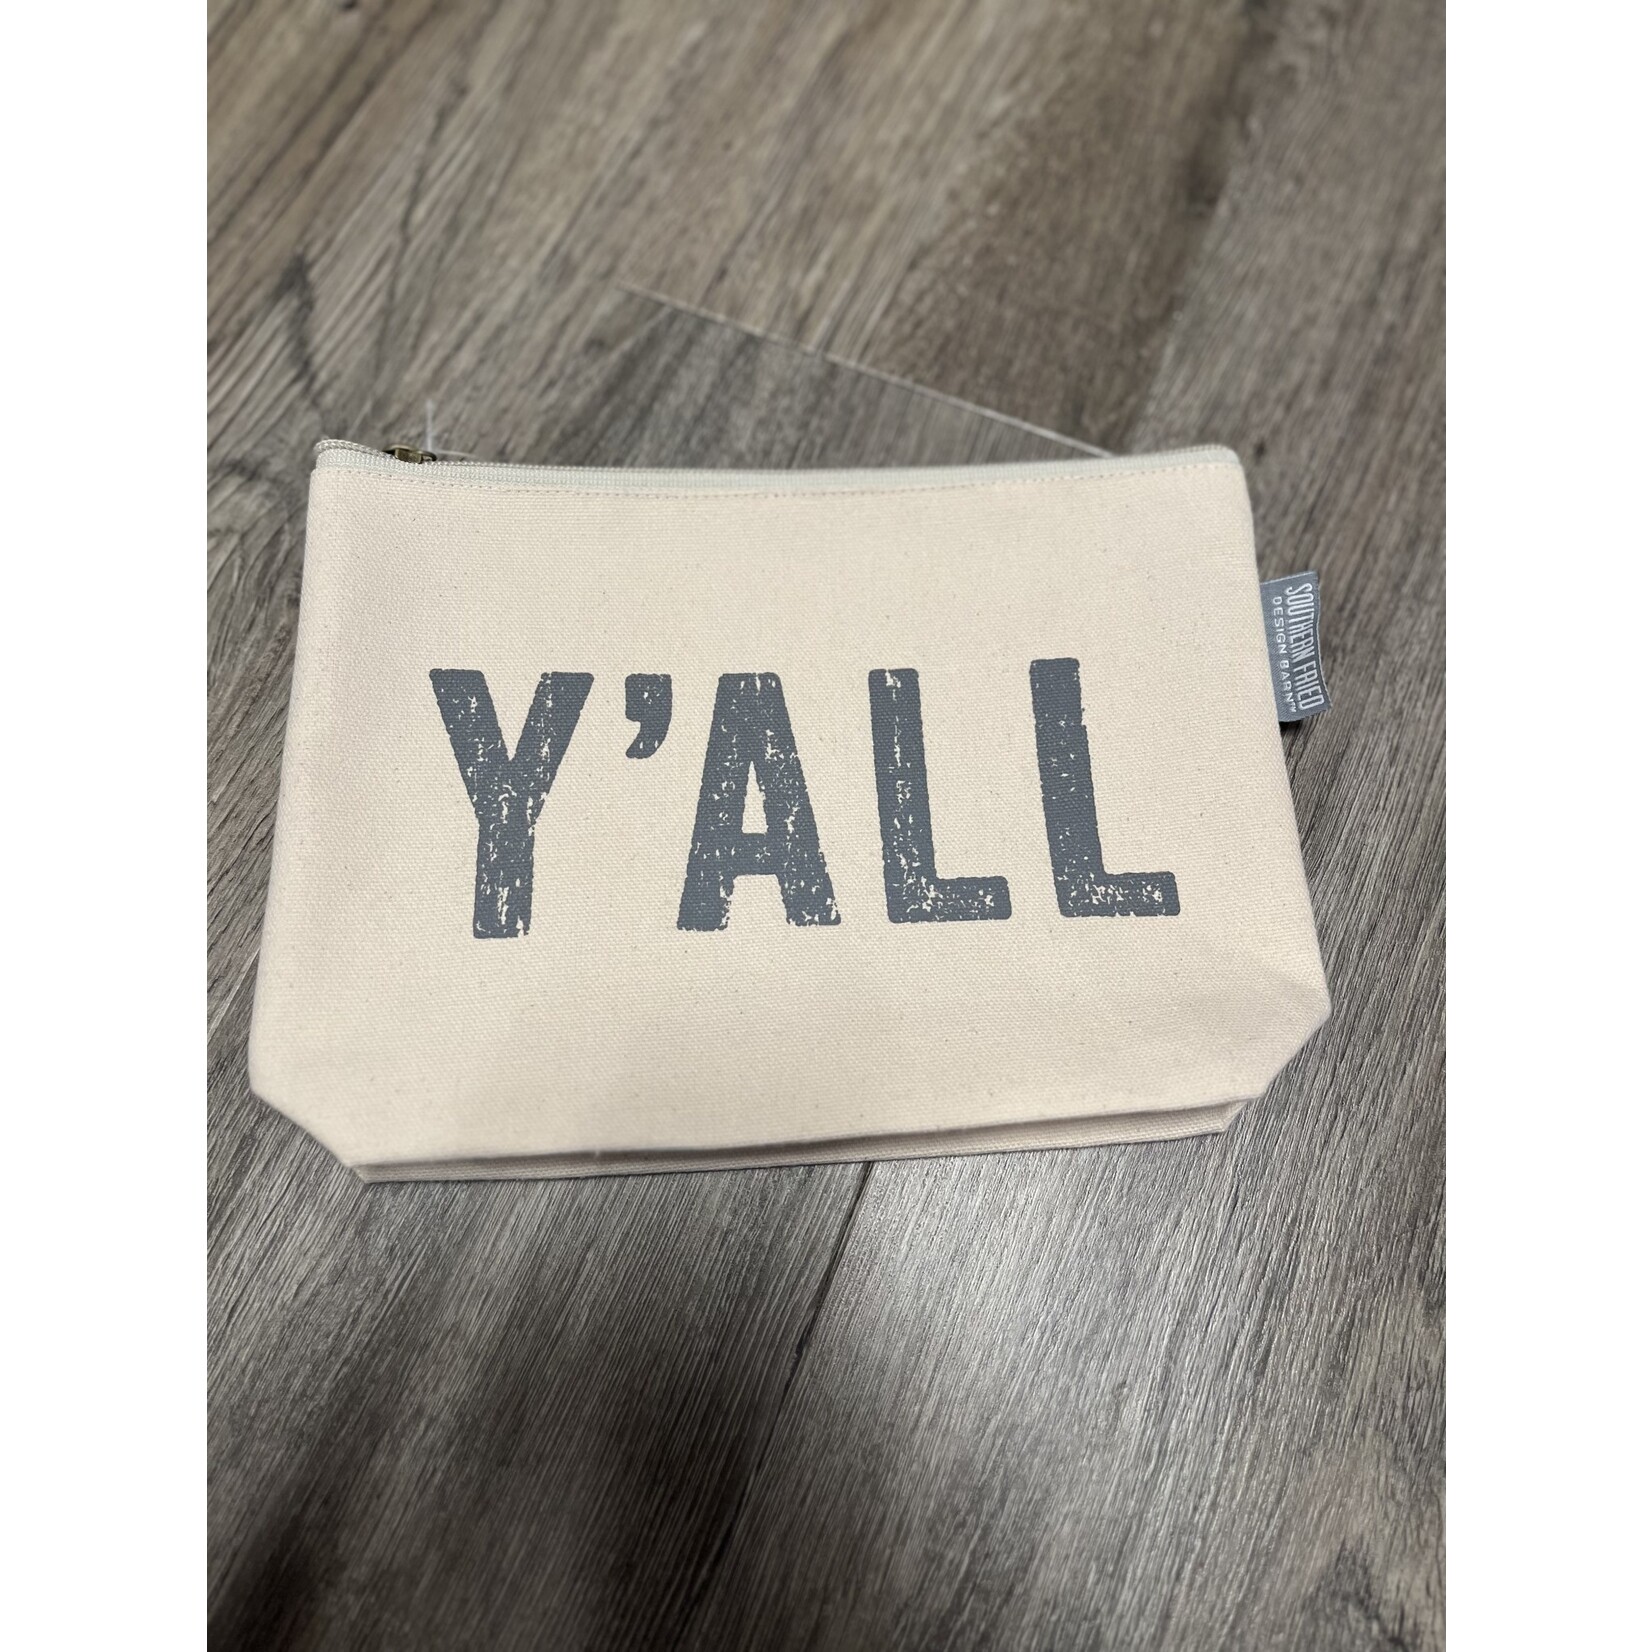 Southern Fried Design Y'all Zipper Pouch